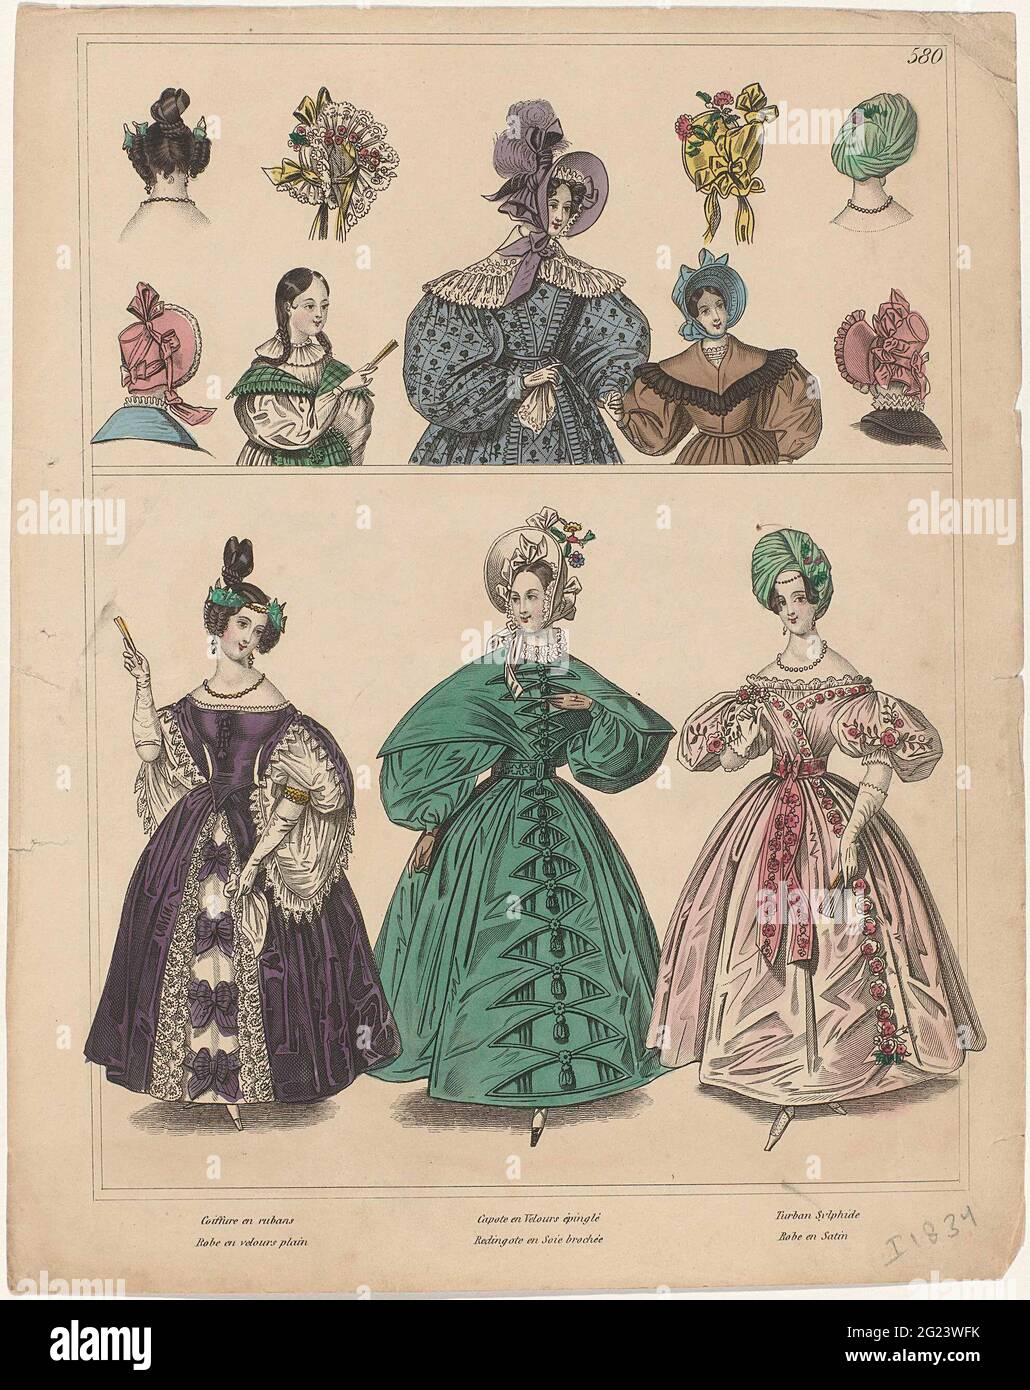 Townsend's Monthly Selection or Parisian Costumes, CA. 1834, No. 580:  Coiffure and Rubans (). In the upper frame from left to right:  'coiffure' with ribbons, 'capote' of 'velor épinglé', turban or 'turban